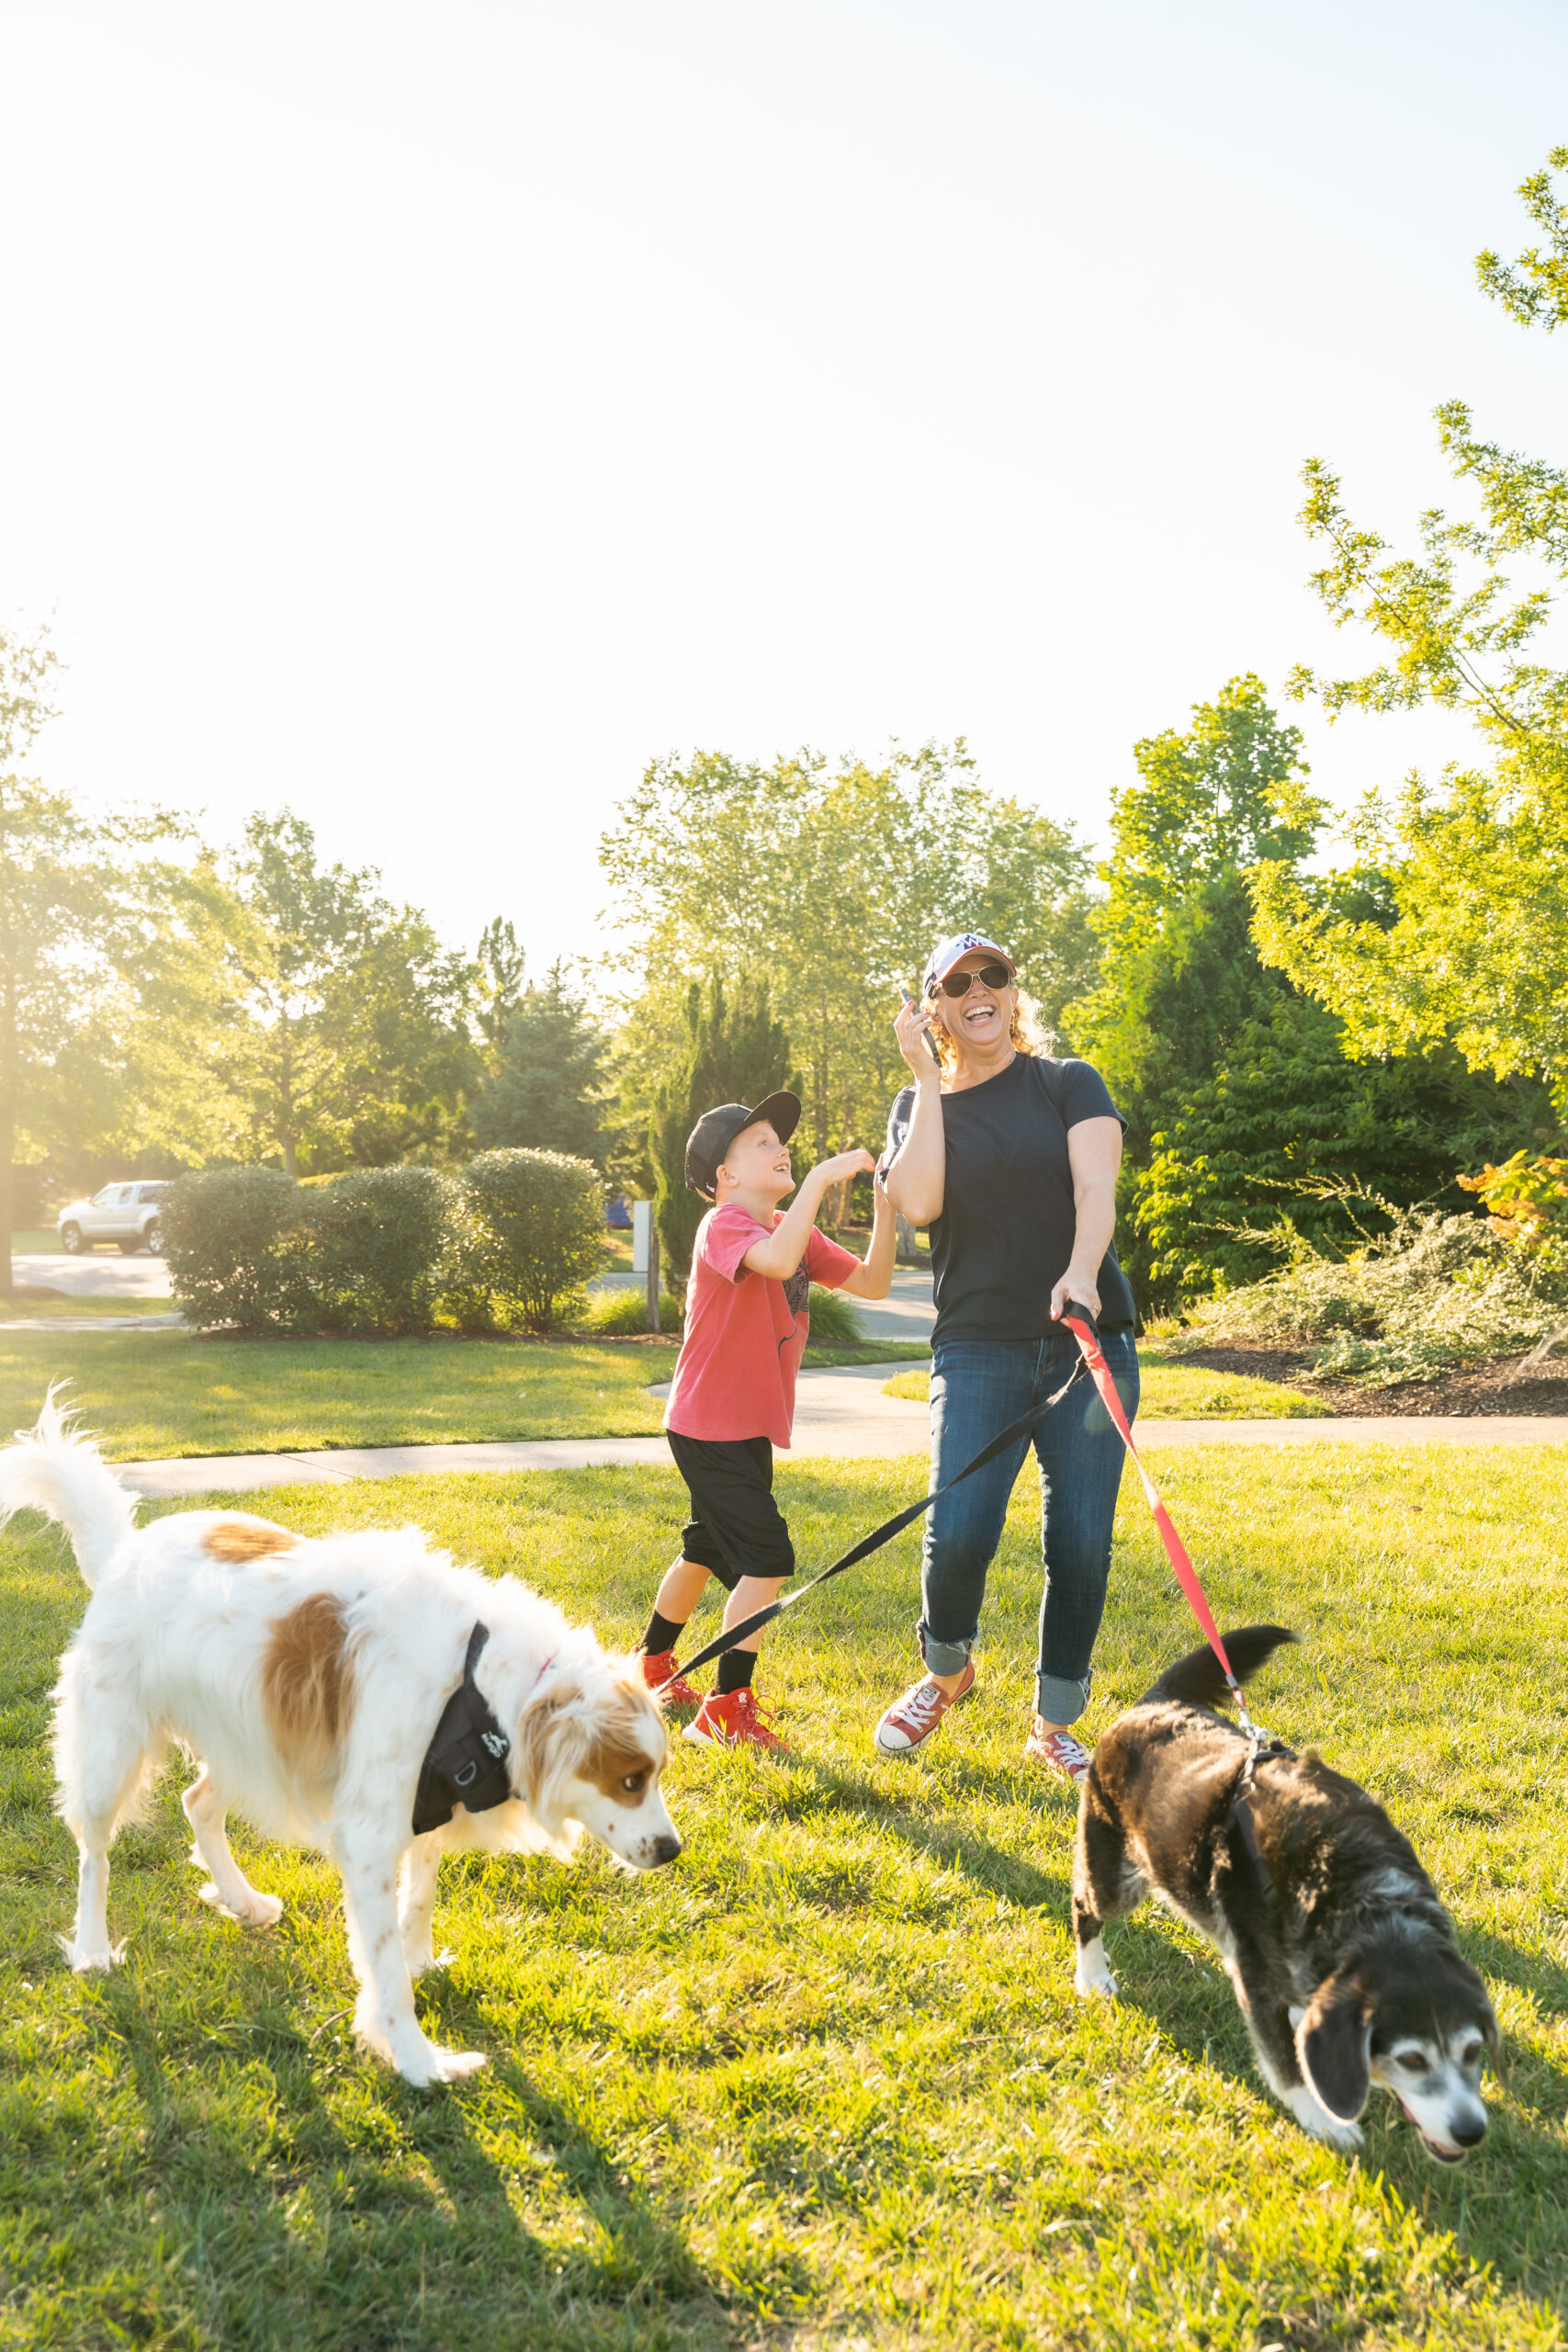 personal branding photo for realtors showing a female realtor on the phone in the sunlight walking 2 dogs while her young son tries to get her attention